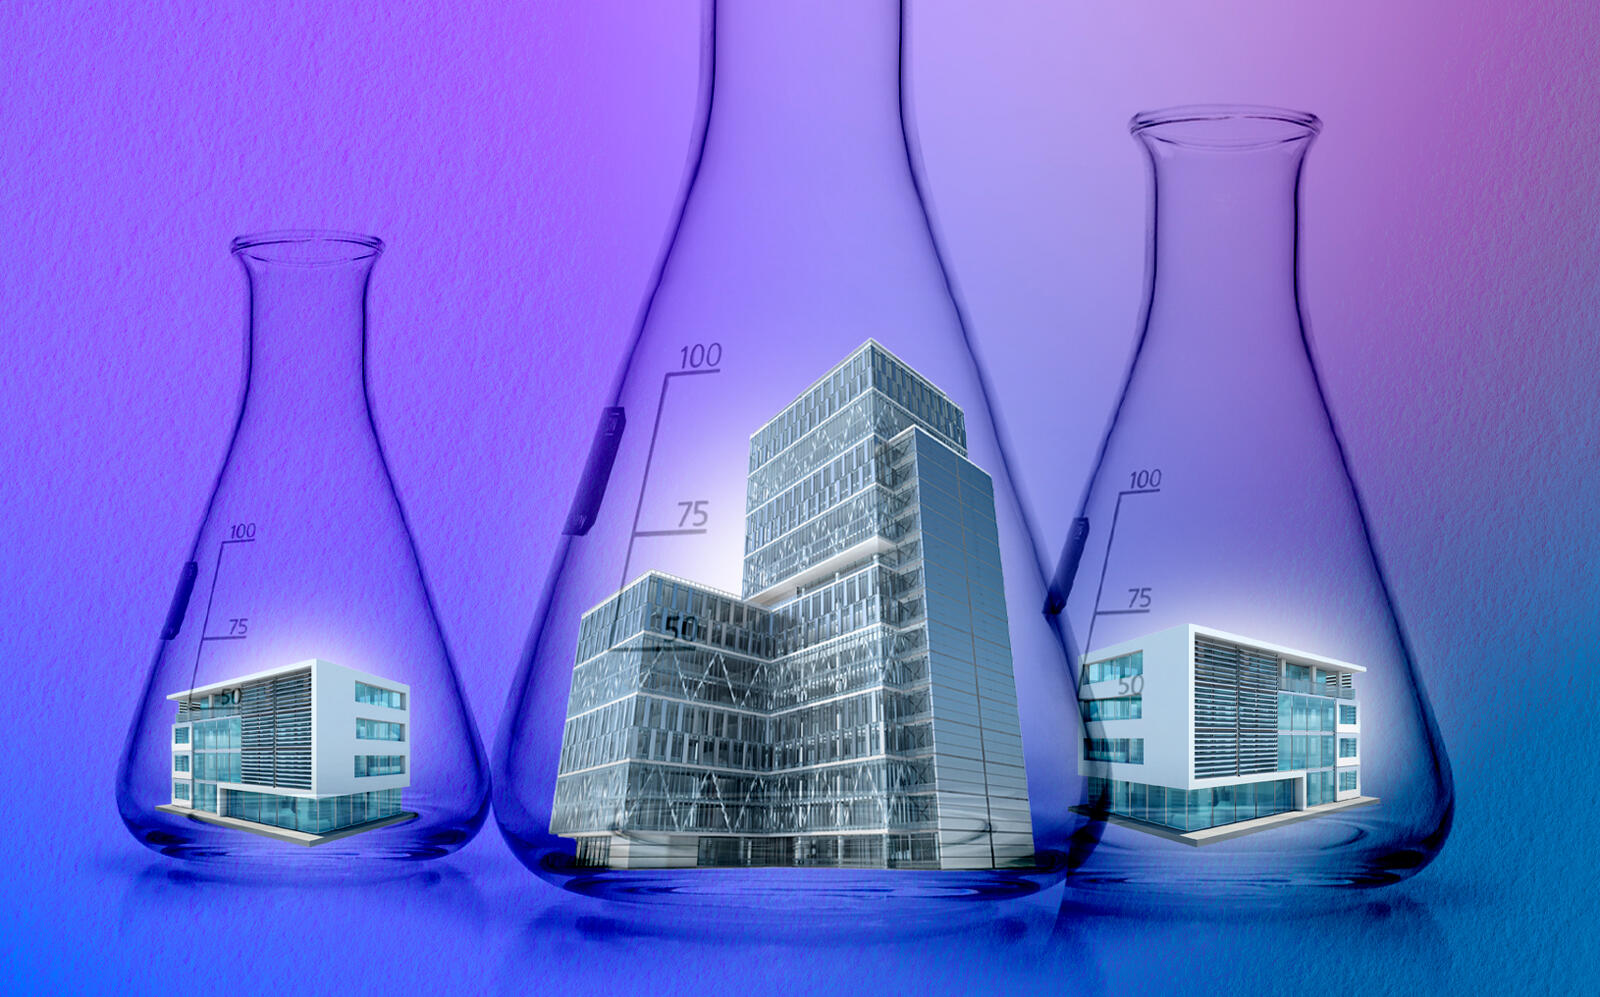 Asking rents for labs or research buildings have been on the rise (iStock)